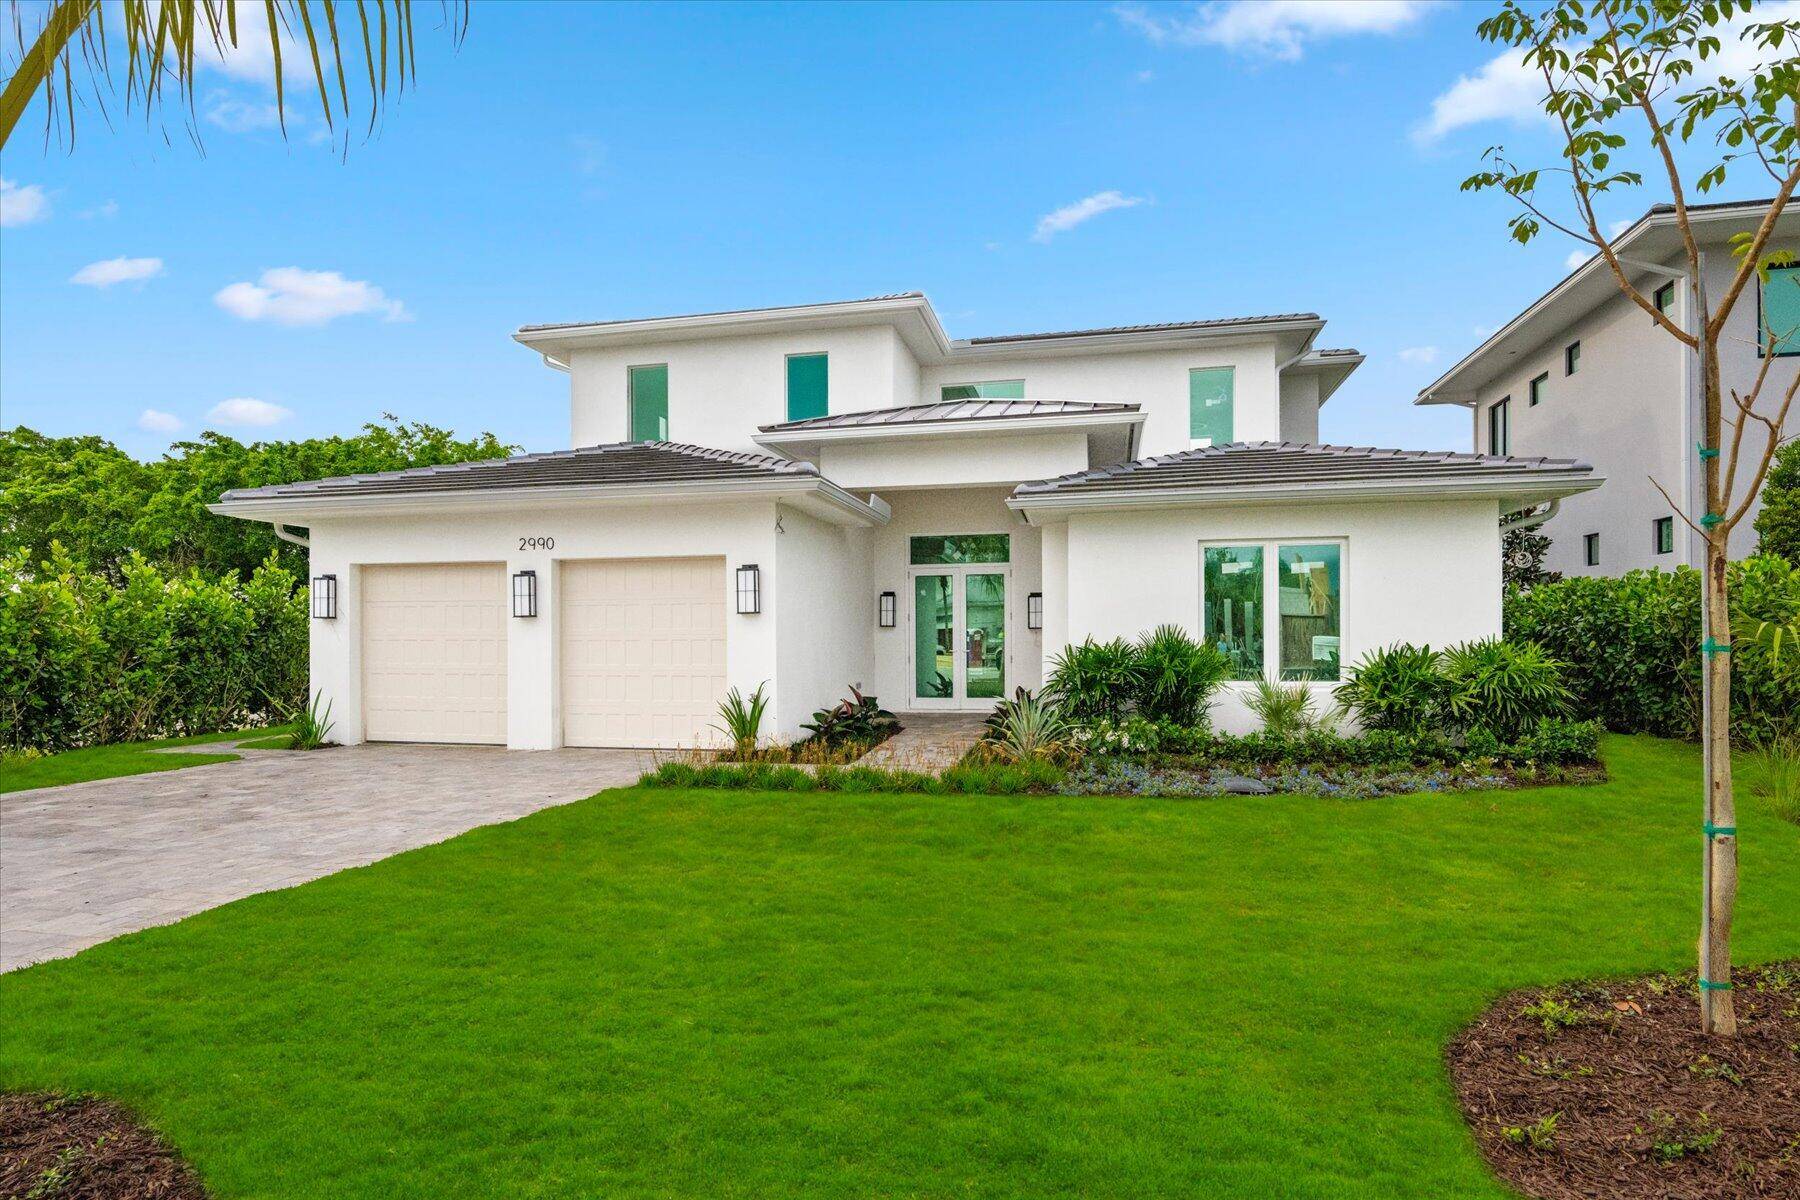 Experience luxury living at its finest in the prestigious Palm Beach Polo community with this brand new 4 bedroom, 4.